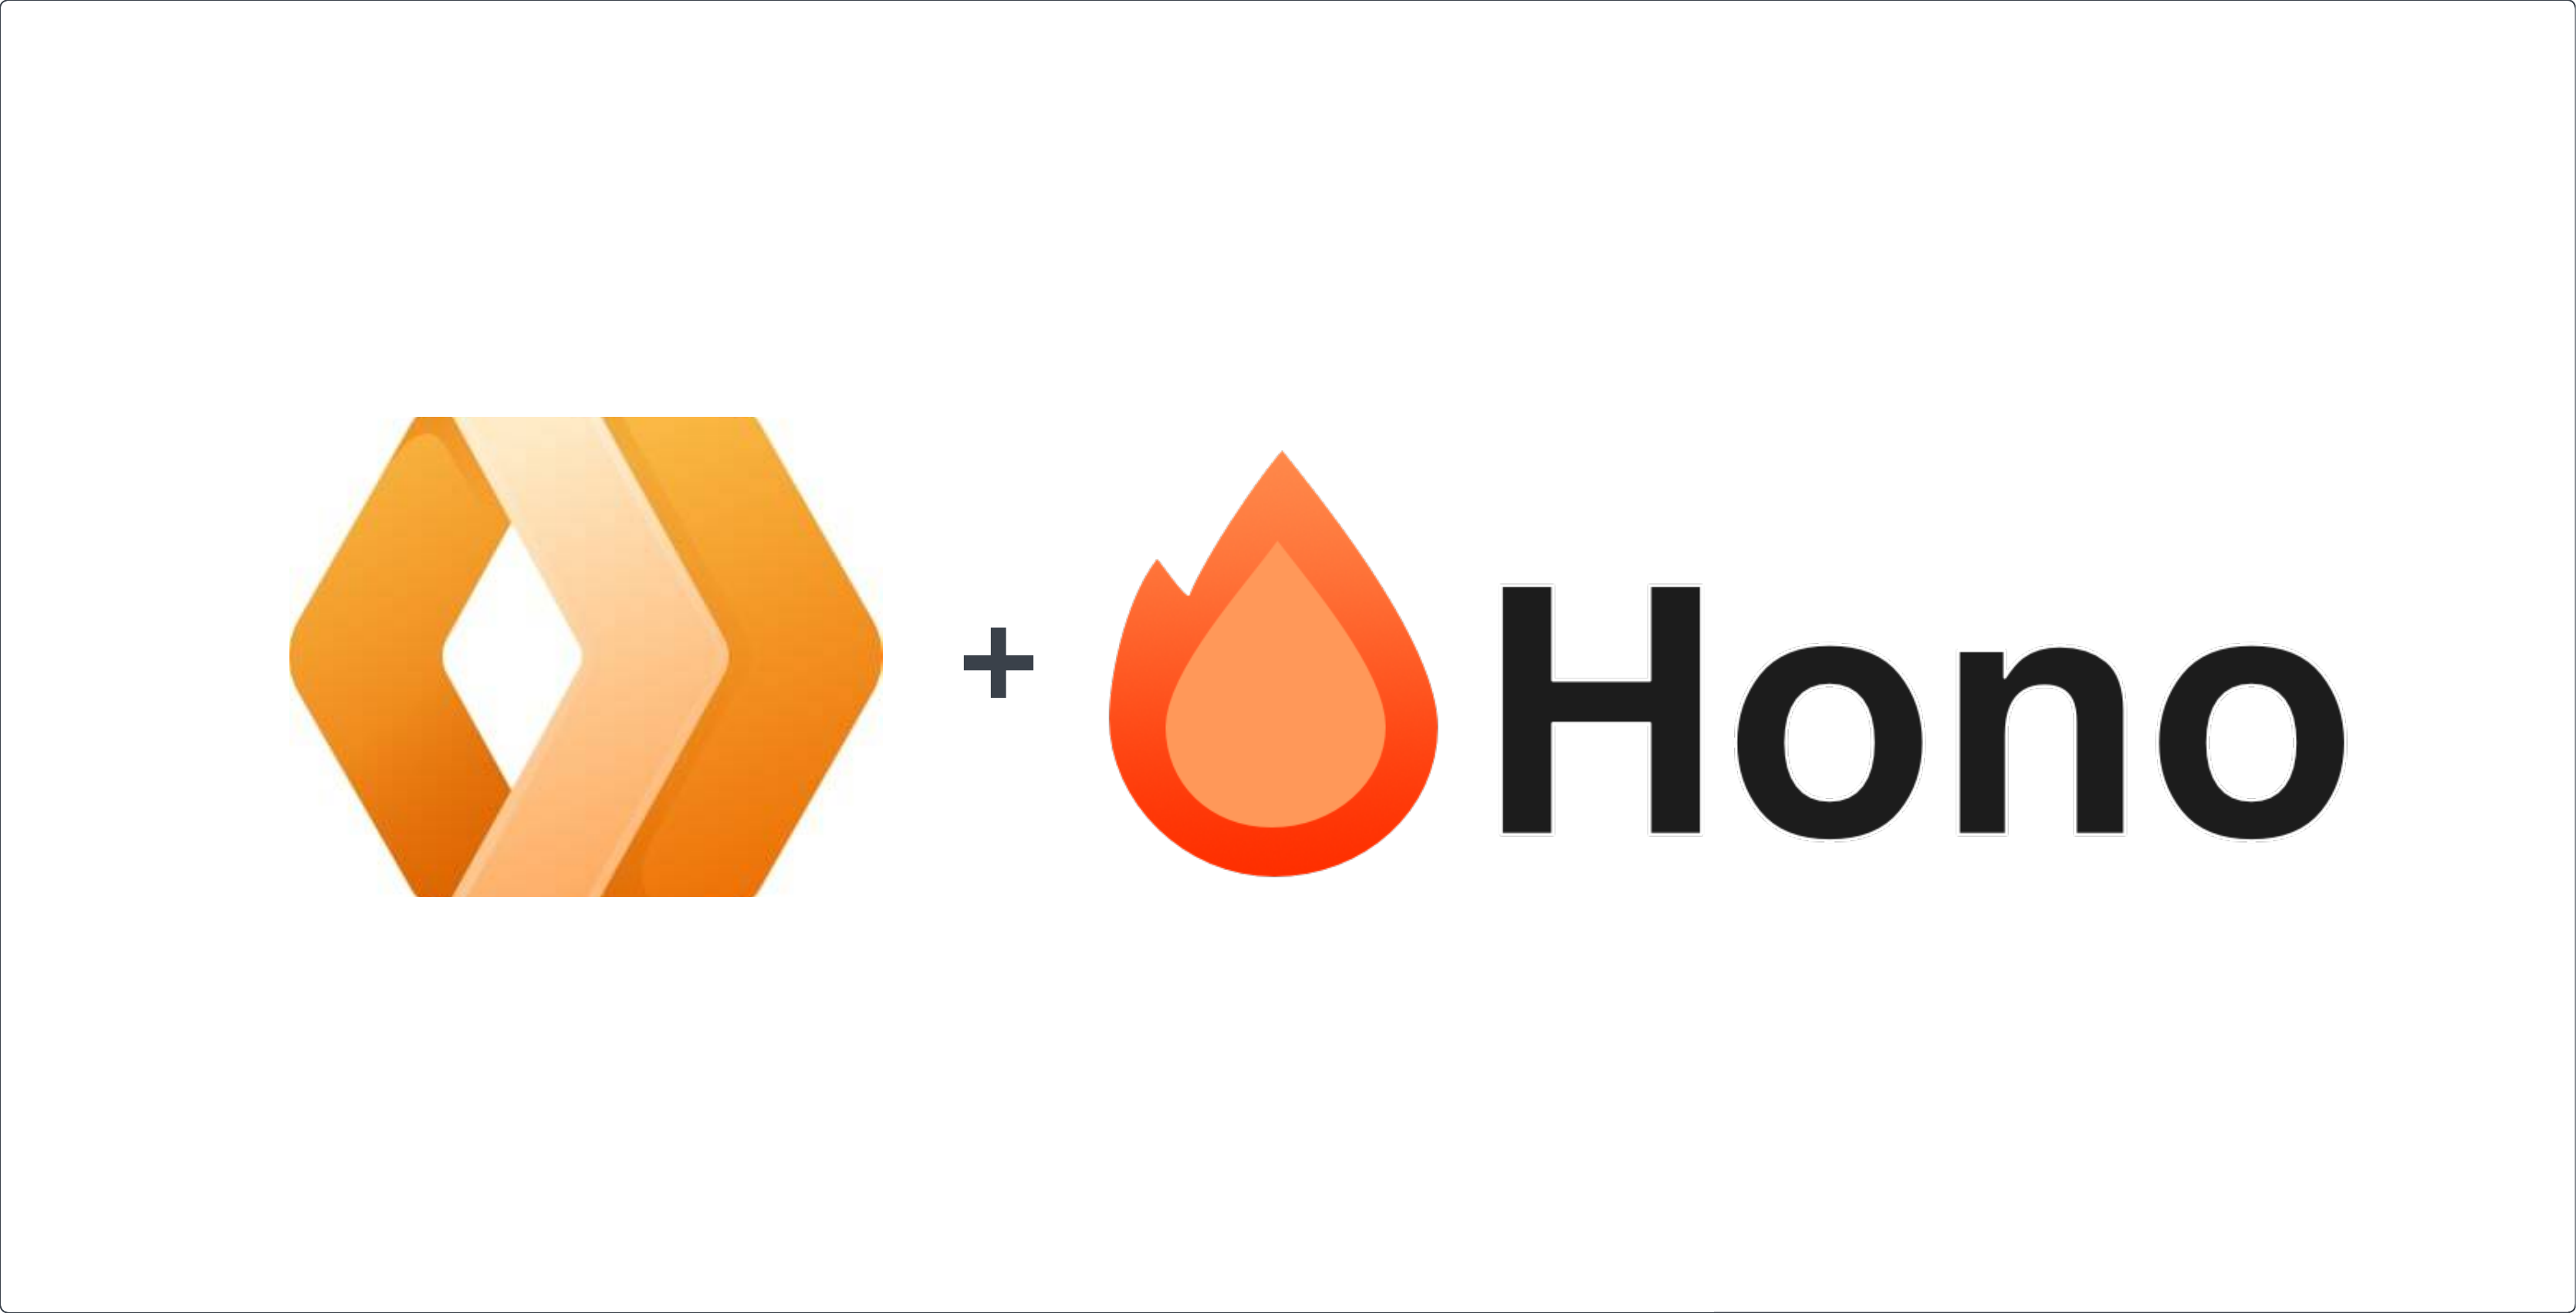 Tidy up Worker endpoints with Hono